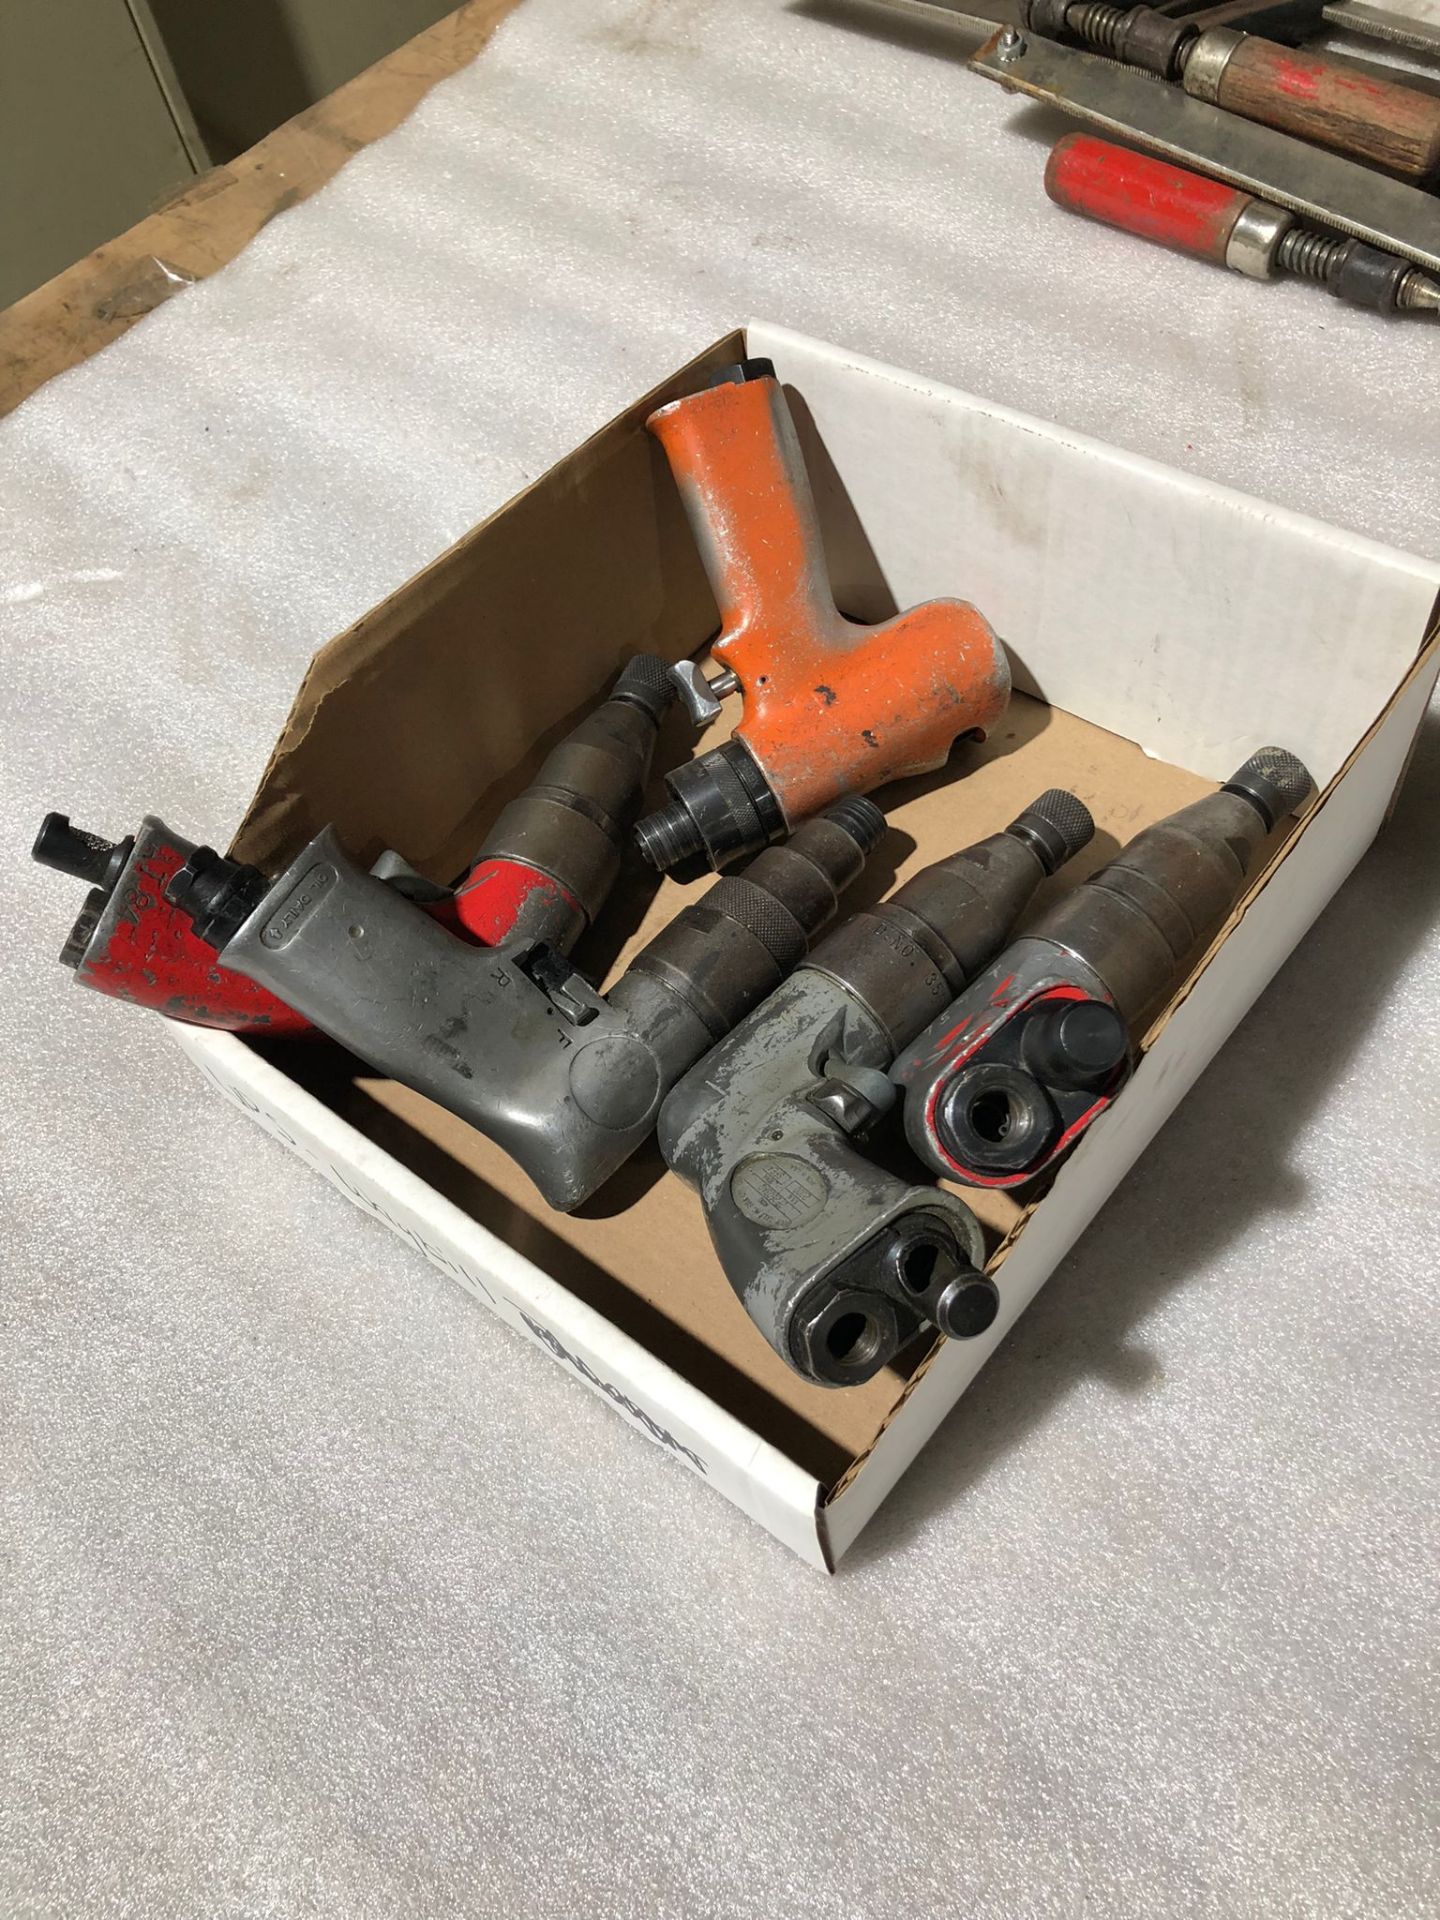 Lot of 5 (5 units) Sioux & Ingersall Rand Air Tools - Image 3 of 3